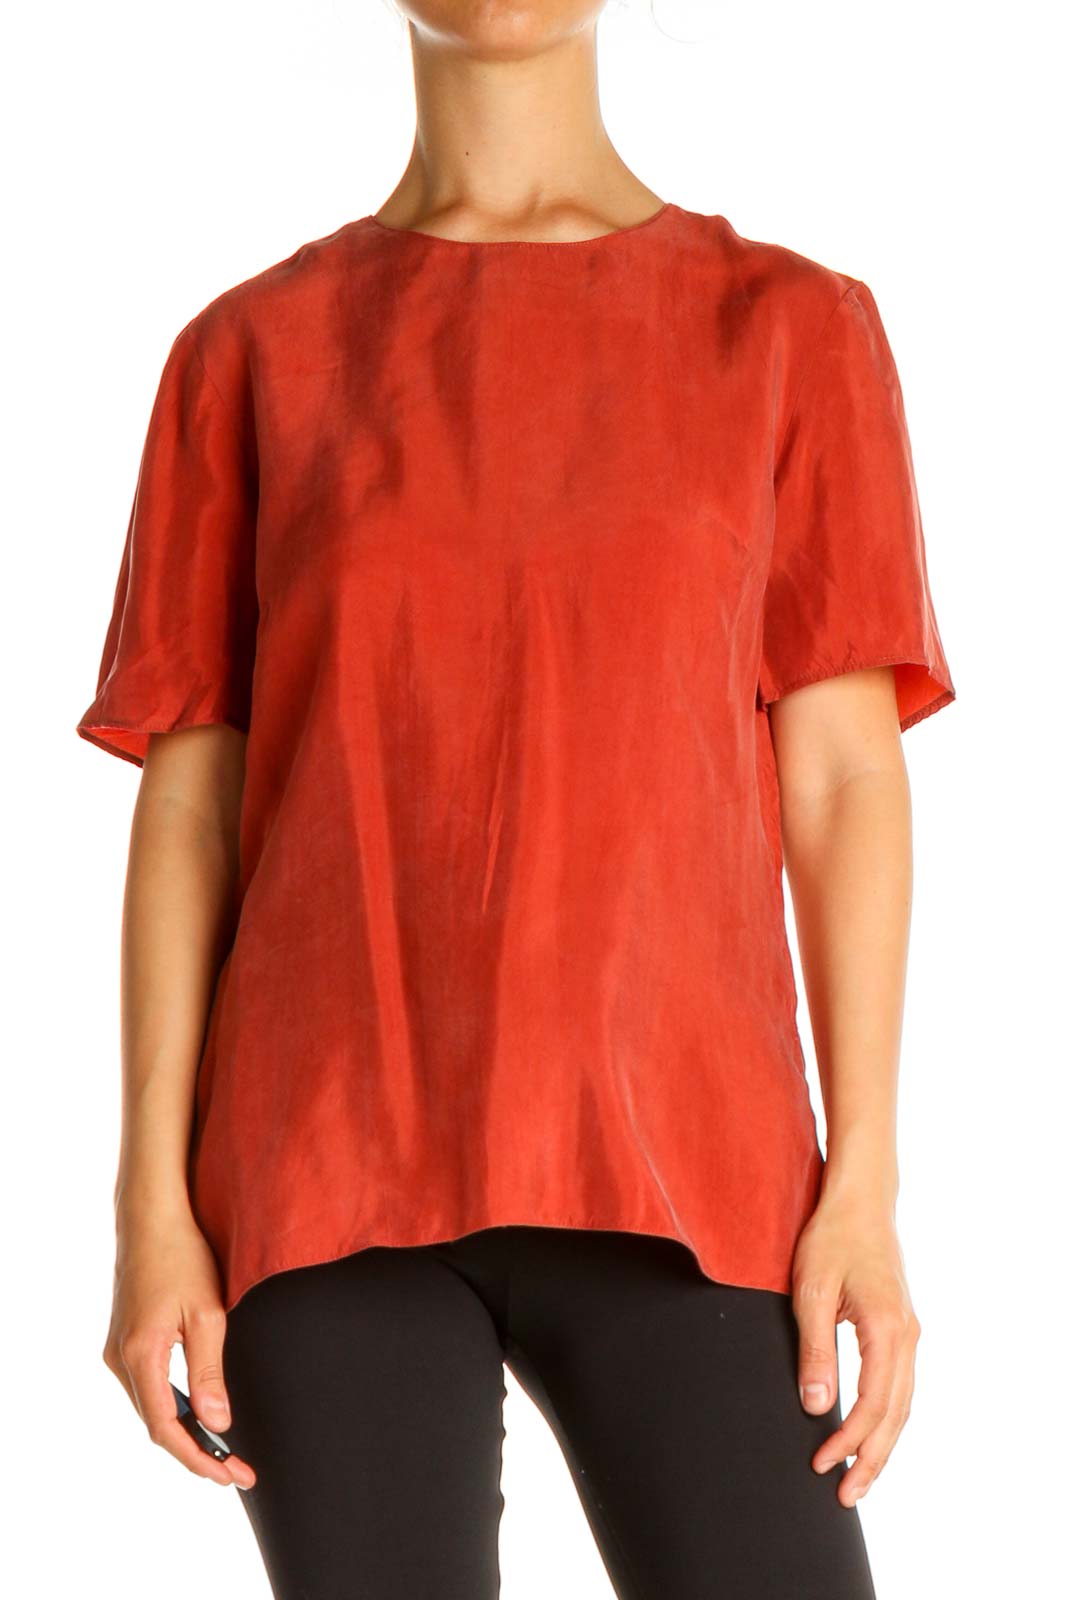 Orange Solid All Day Wear T-Shirt Front